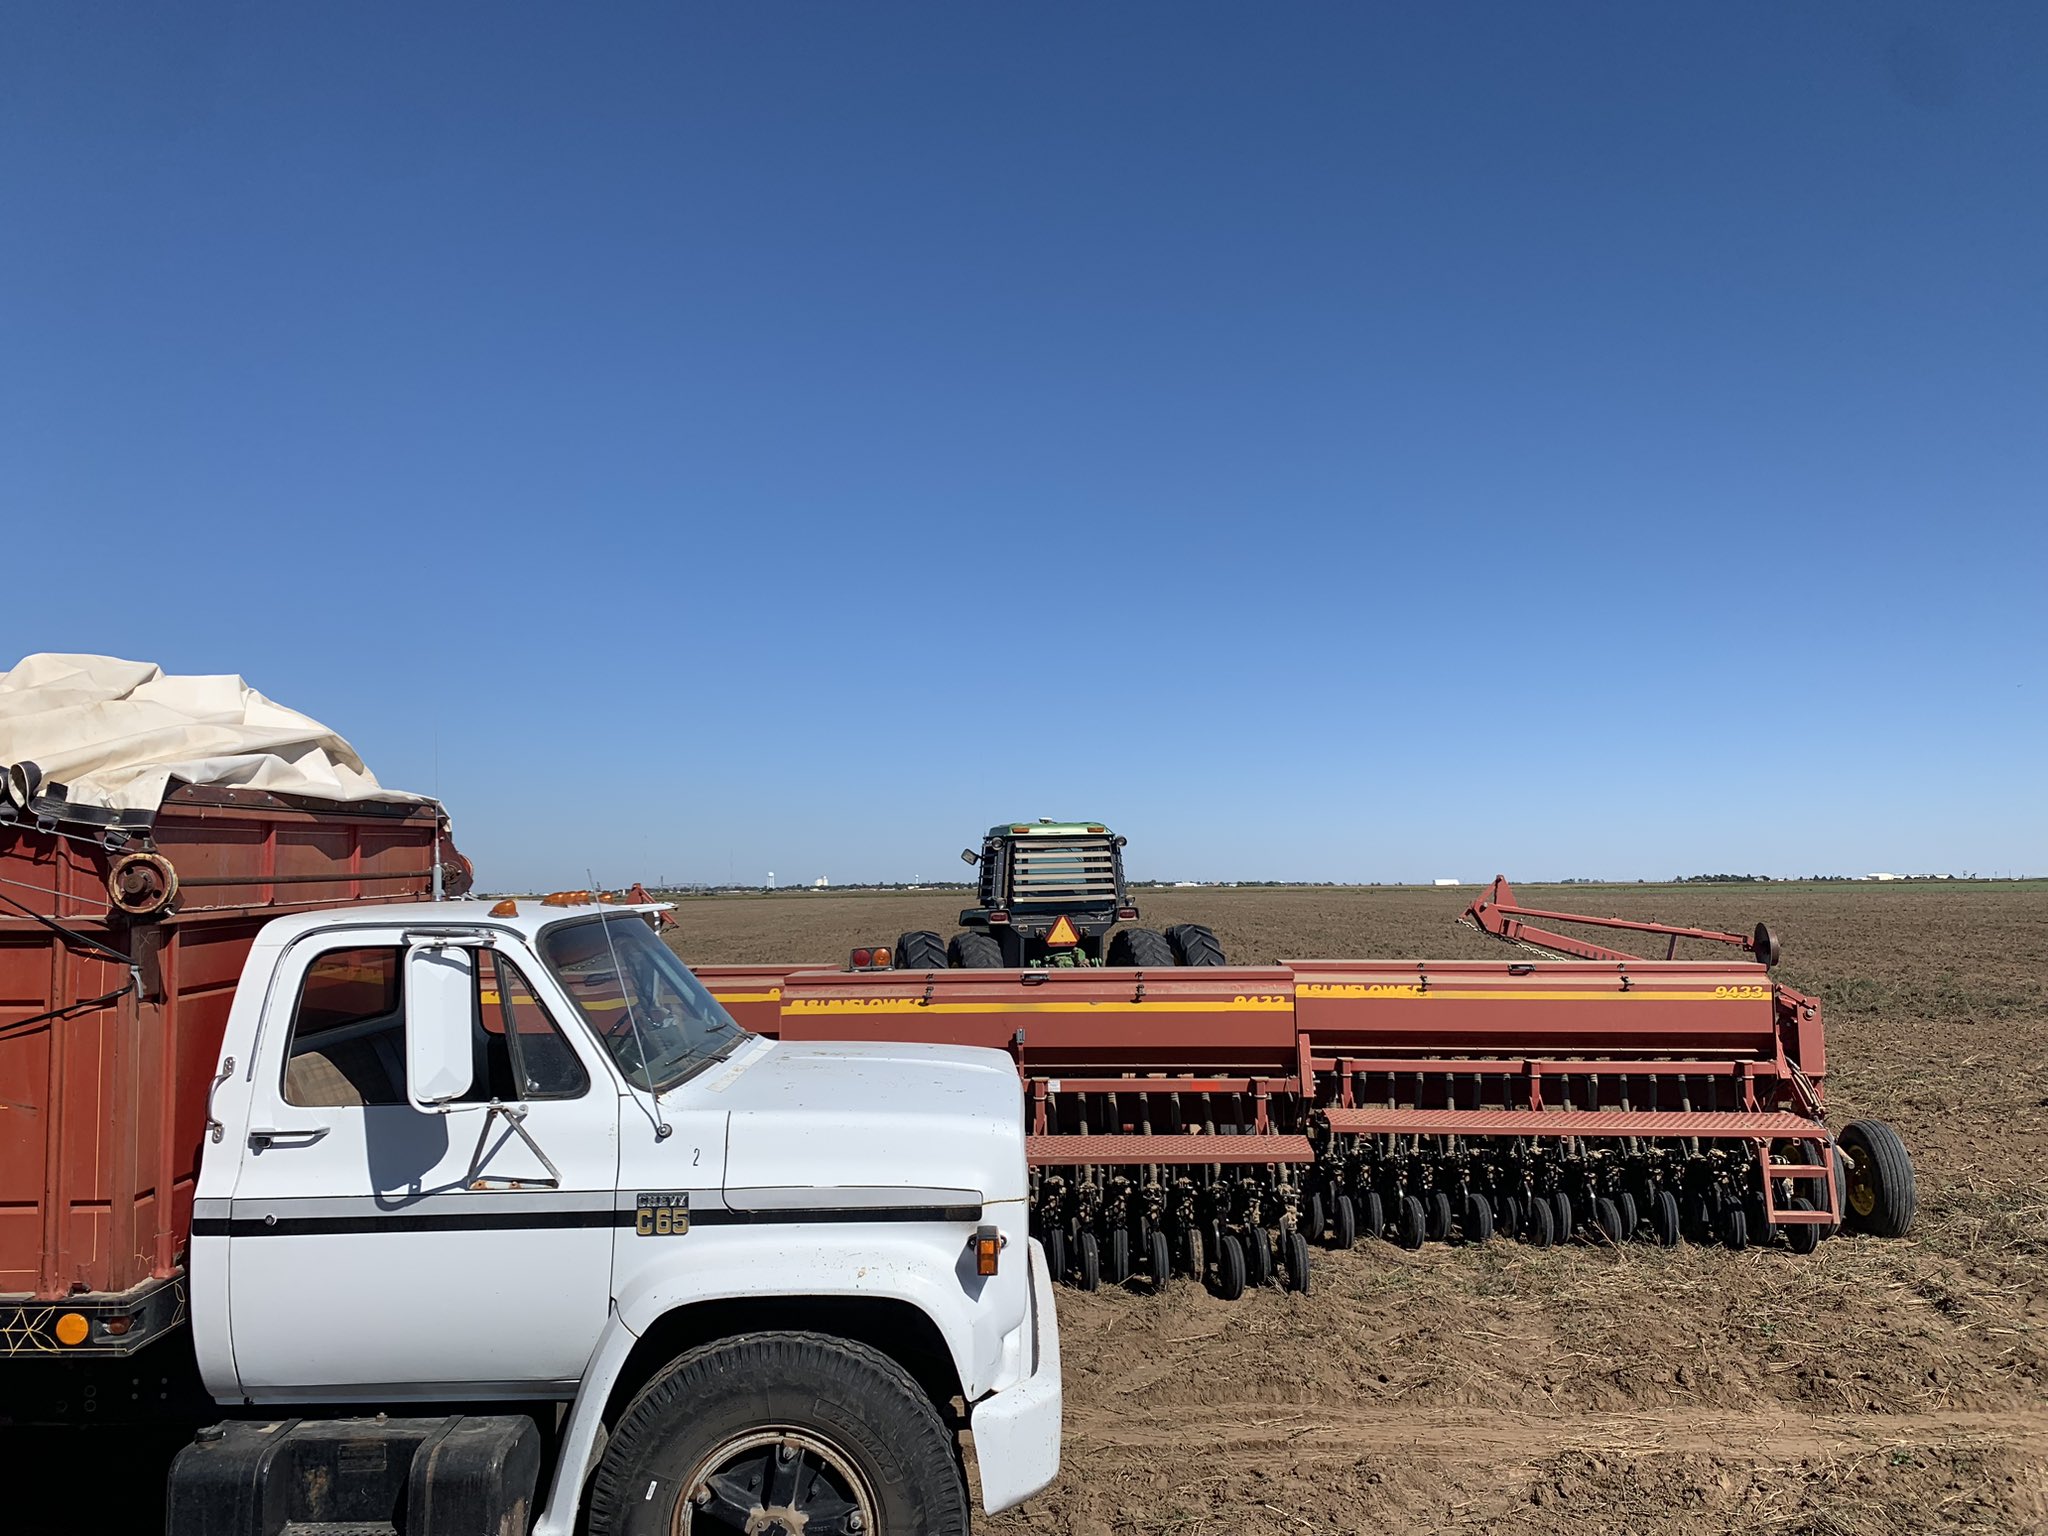 Clint Schnell on X: This past weekend I went back home to Spearman to plow  & plant winter wheat on land I purchased that has been in my family for  over 100